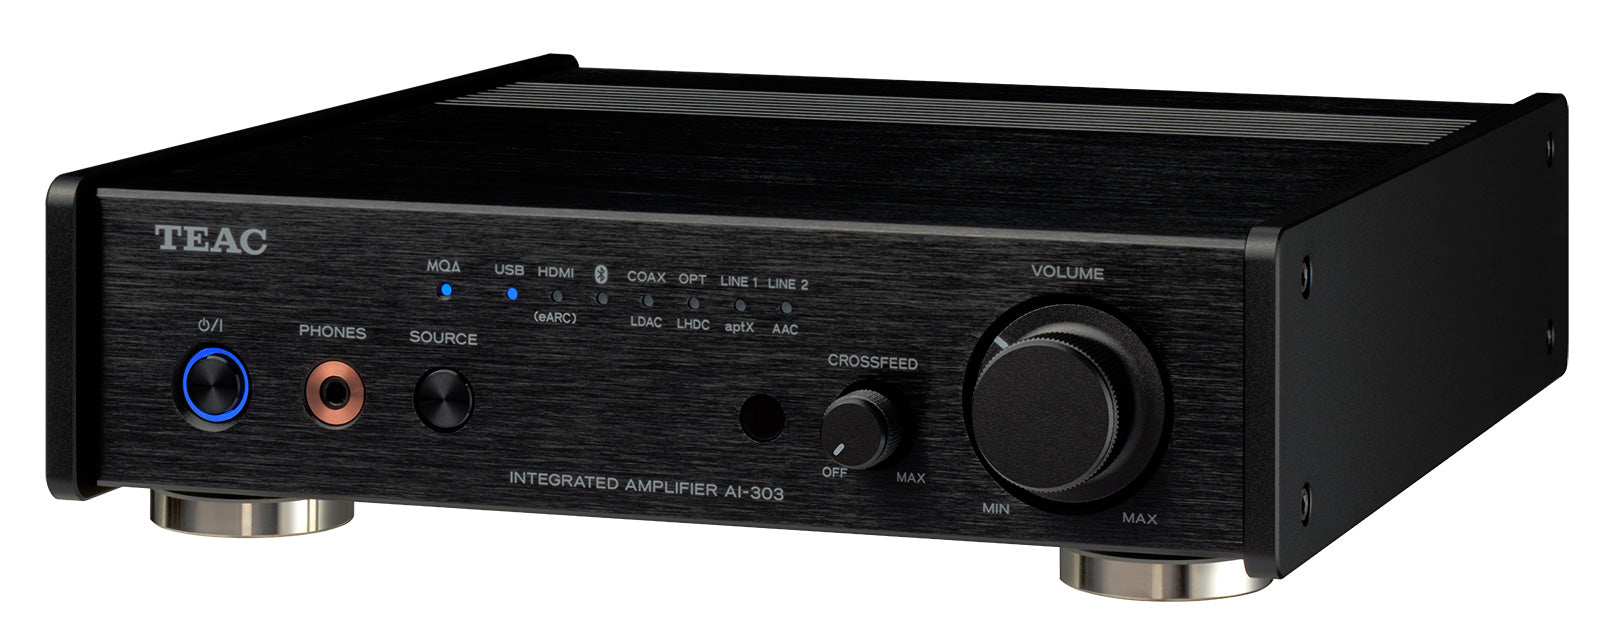 HQ AI-303 Integrated TEAC Safe Amplifier and Black DAC USB Sound —